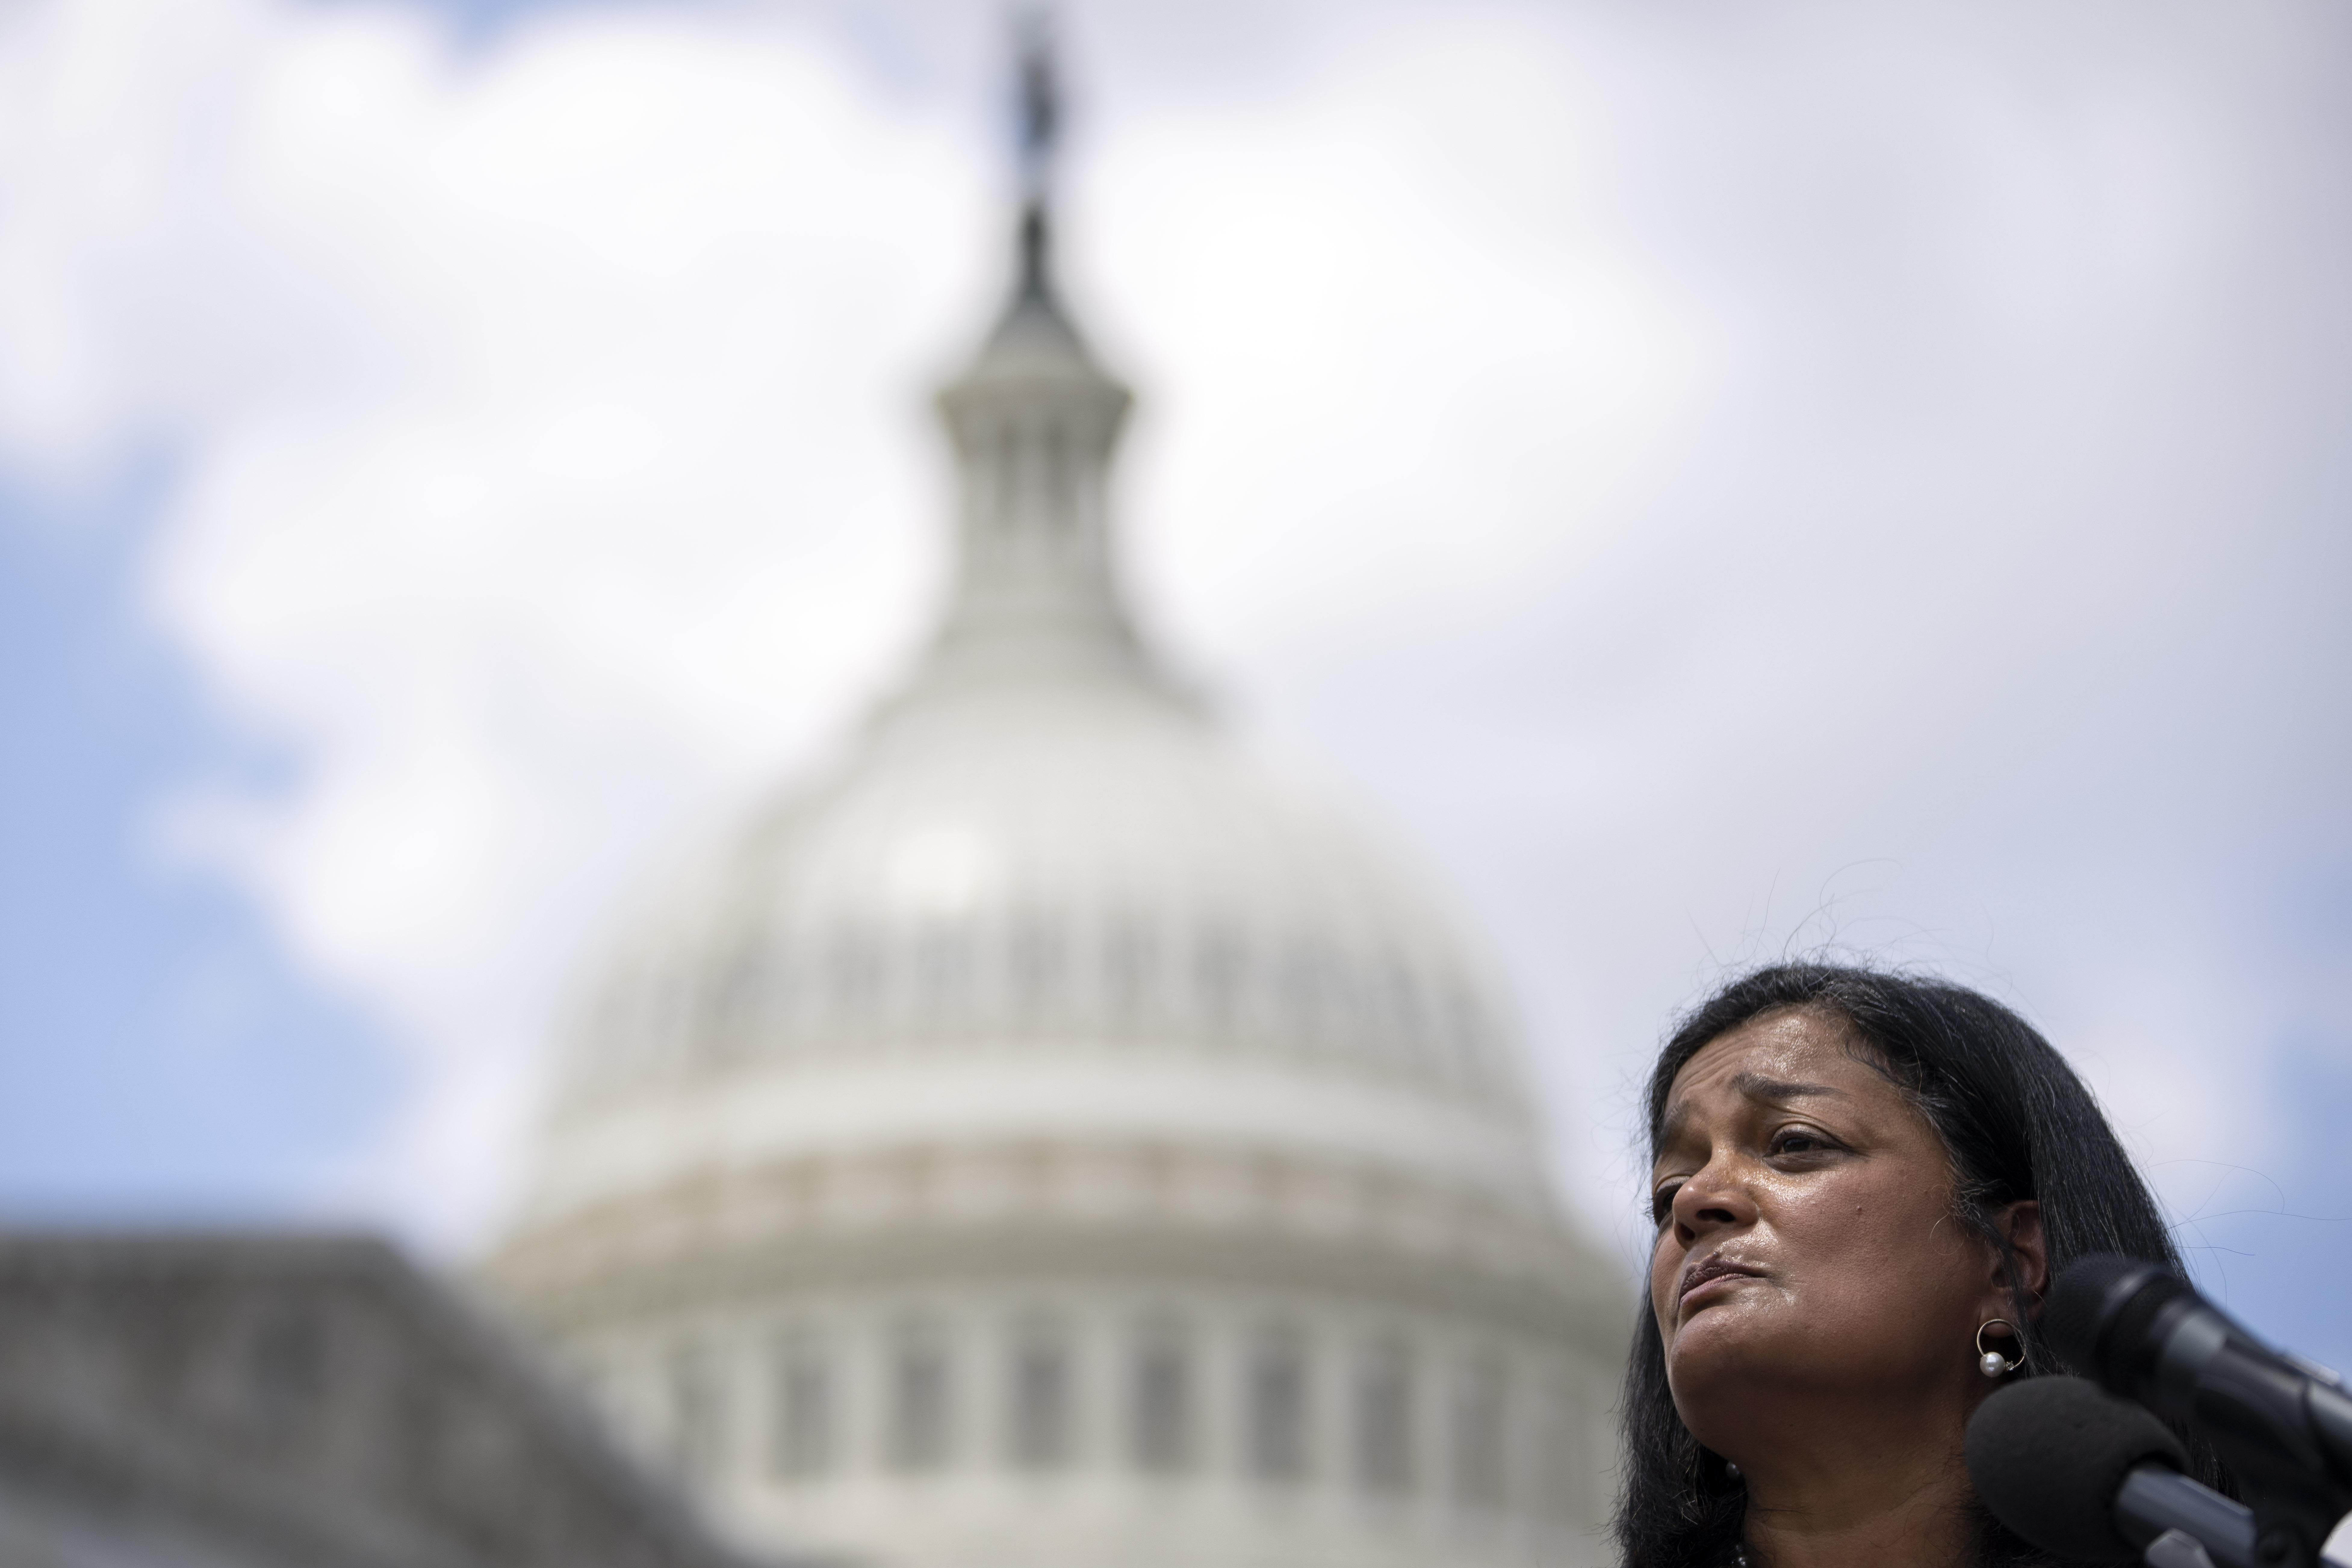 Rep. Pramila Jayapal (D-WA) speaks during a news conference with the Capitol and a cloudy sky behind her.